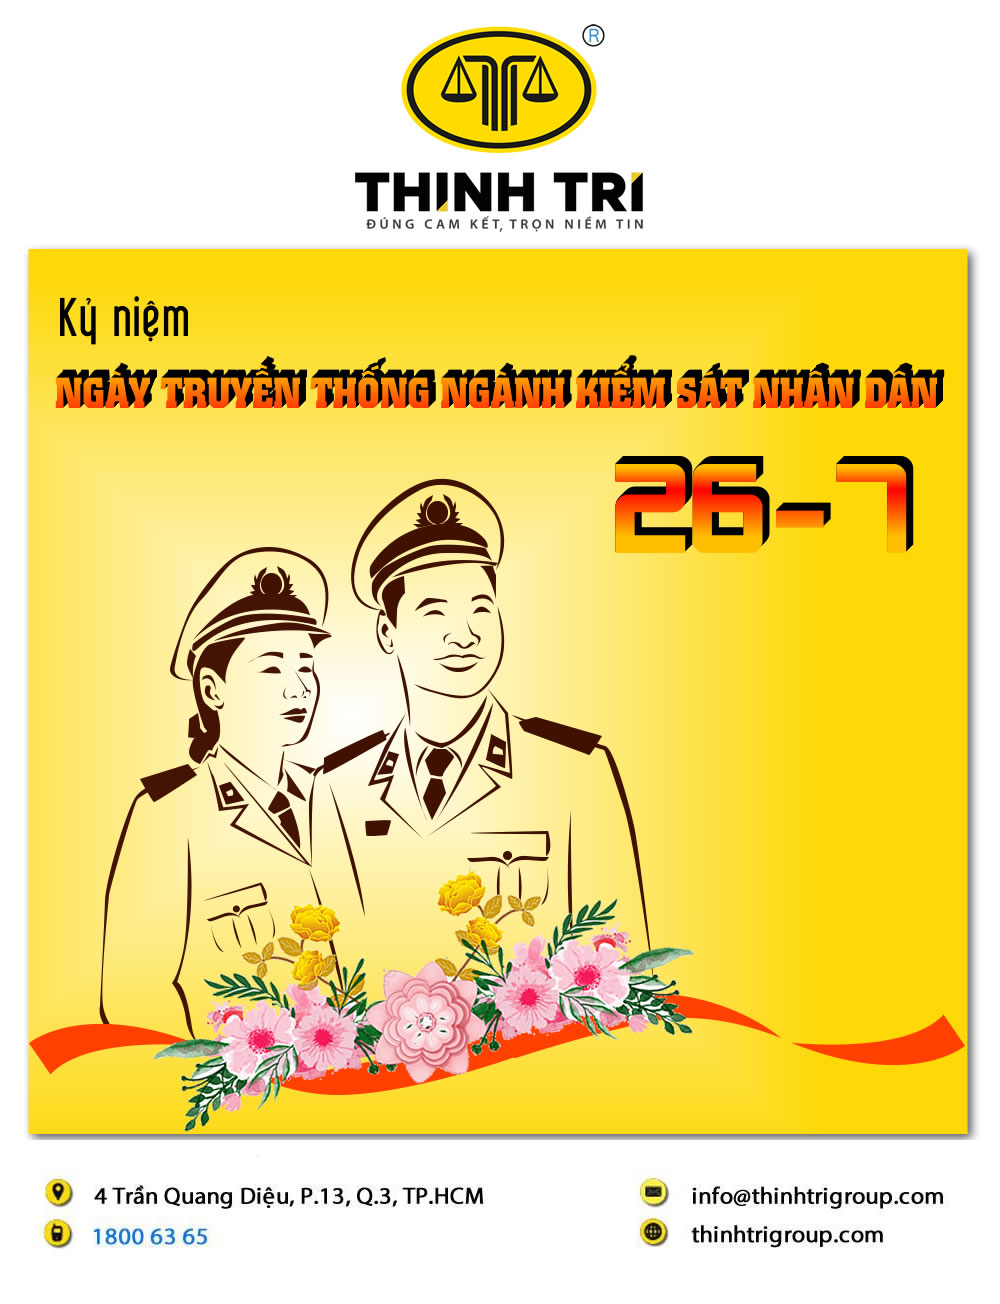 THINH TRI LAW CELEBRATES TRADITIONAL DAY OF PEOPLE'S PROCURACY ON July 26, 2021